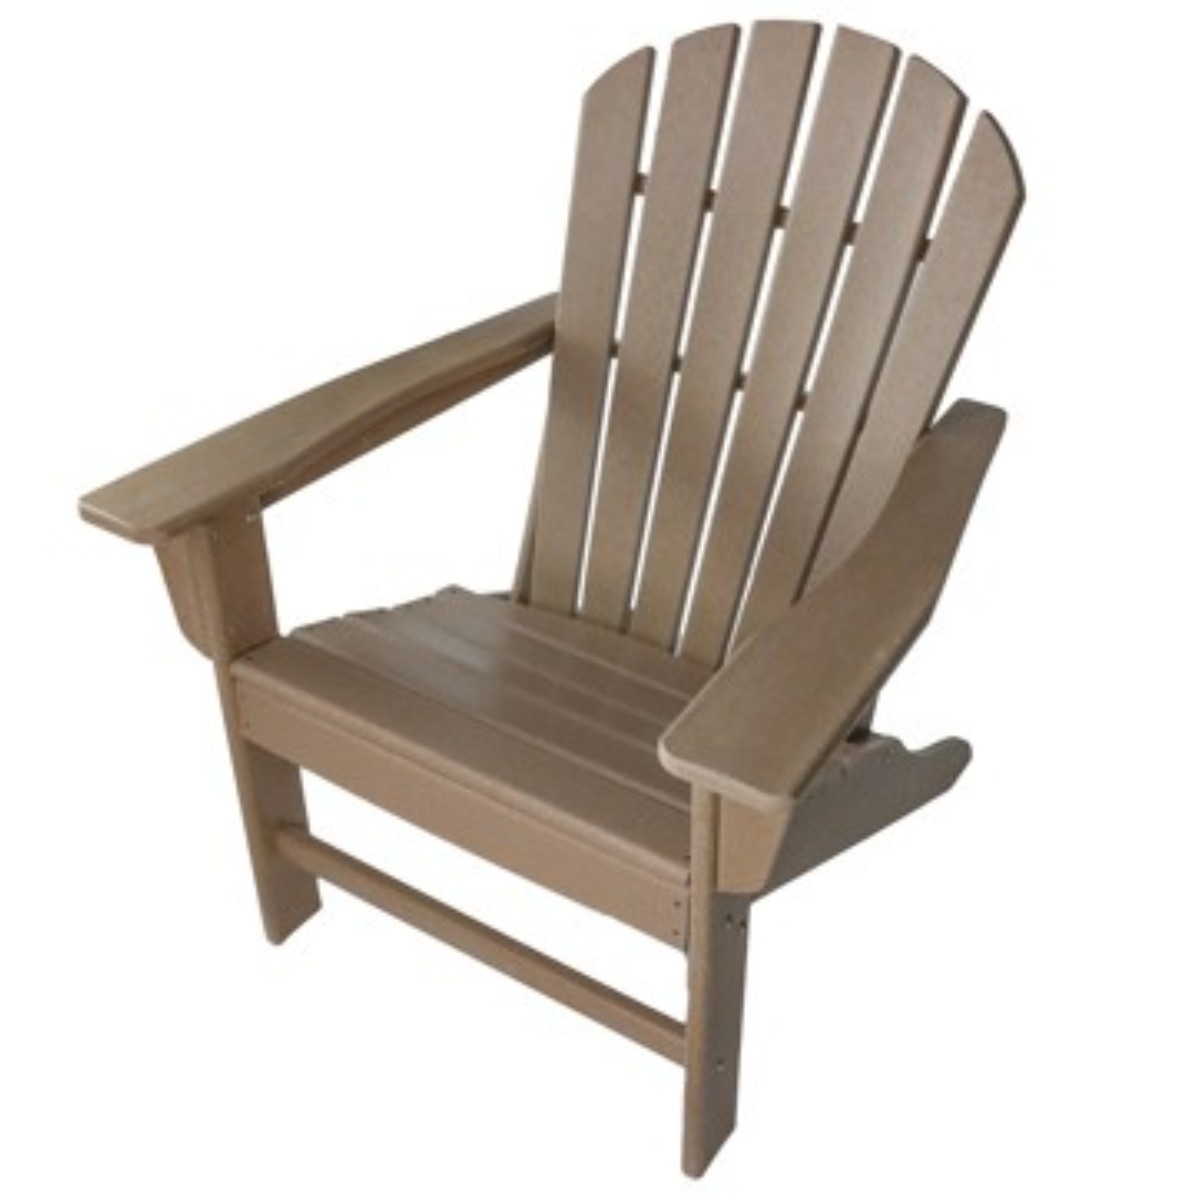 Folding Adirondack Chair Patio Chair Lawn Chair Outdoor 350 lbs Capacity Load Adirondack Chairs Weather Resistant for Patio Deck Garden 33.07*31.1*36.4" HDPE Resin Wood,Brown - image 5 of 8